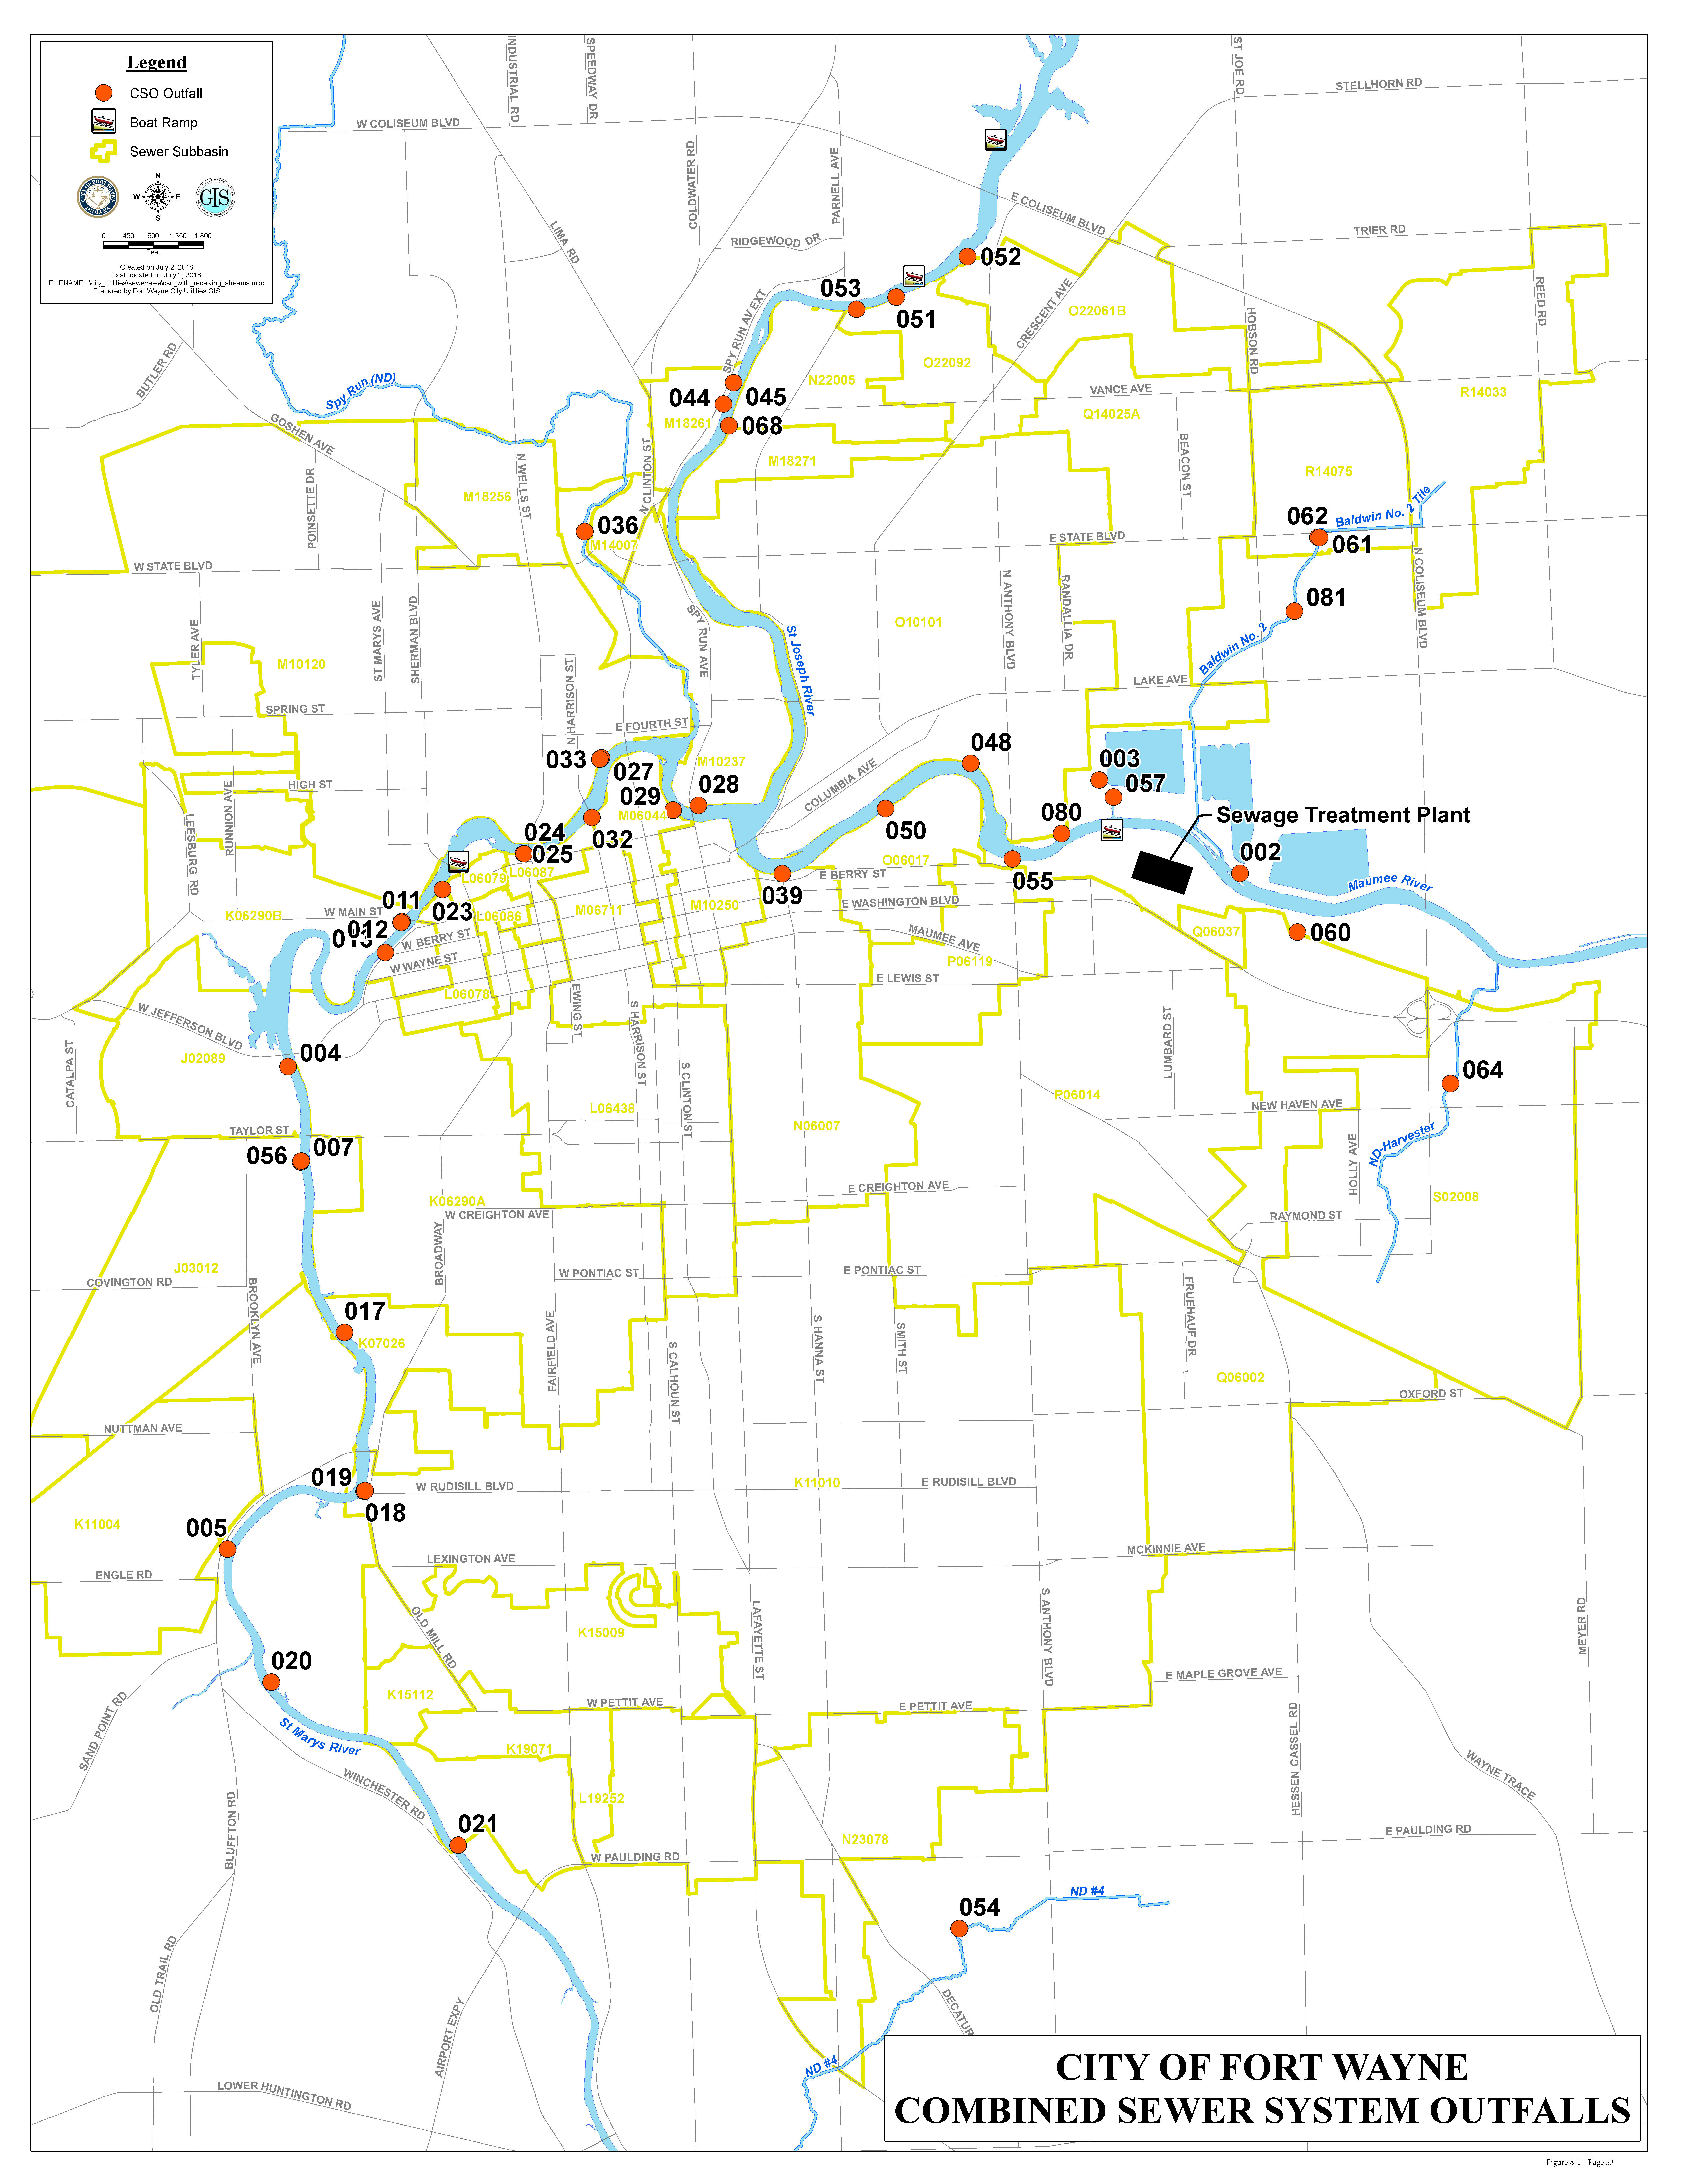 Map of Fort Wayne showing combined sewer outfall locations.